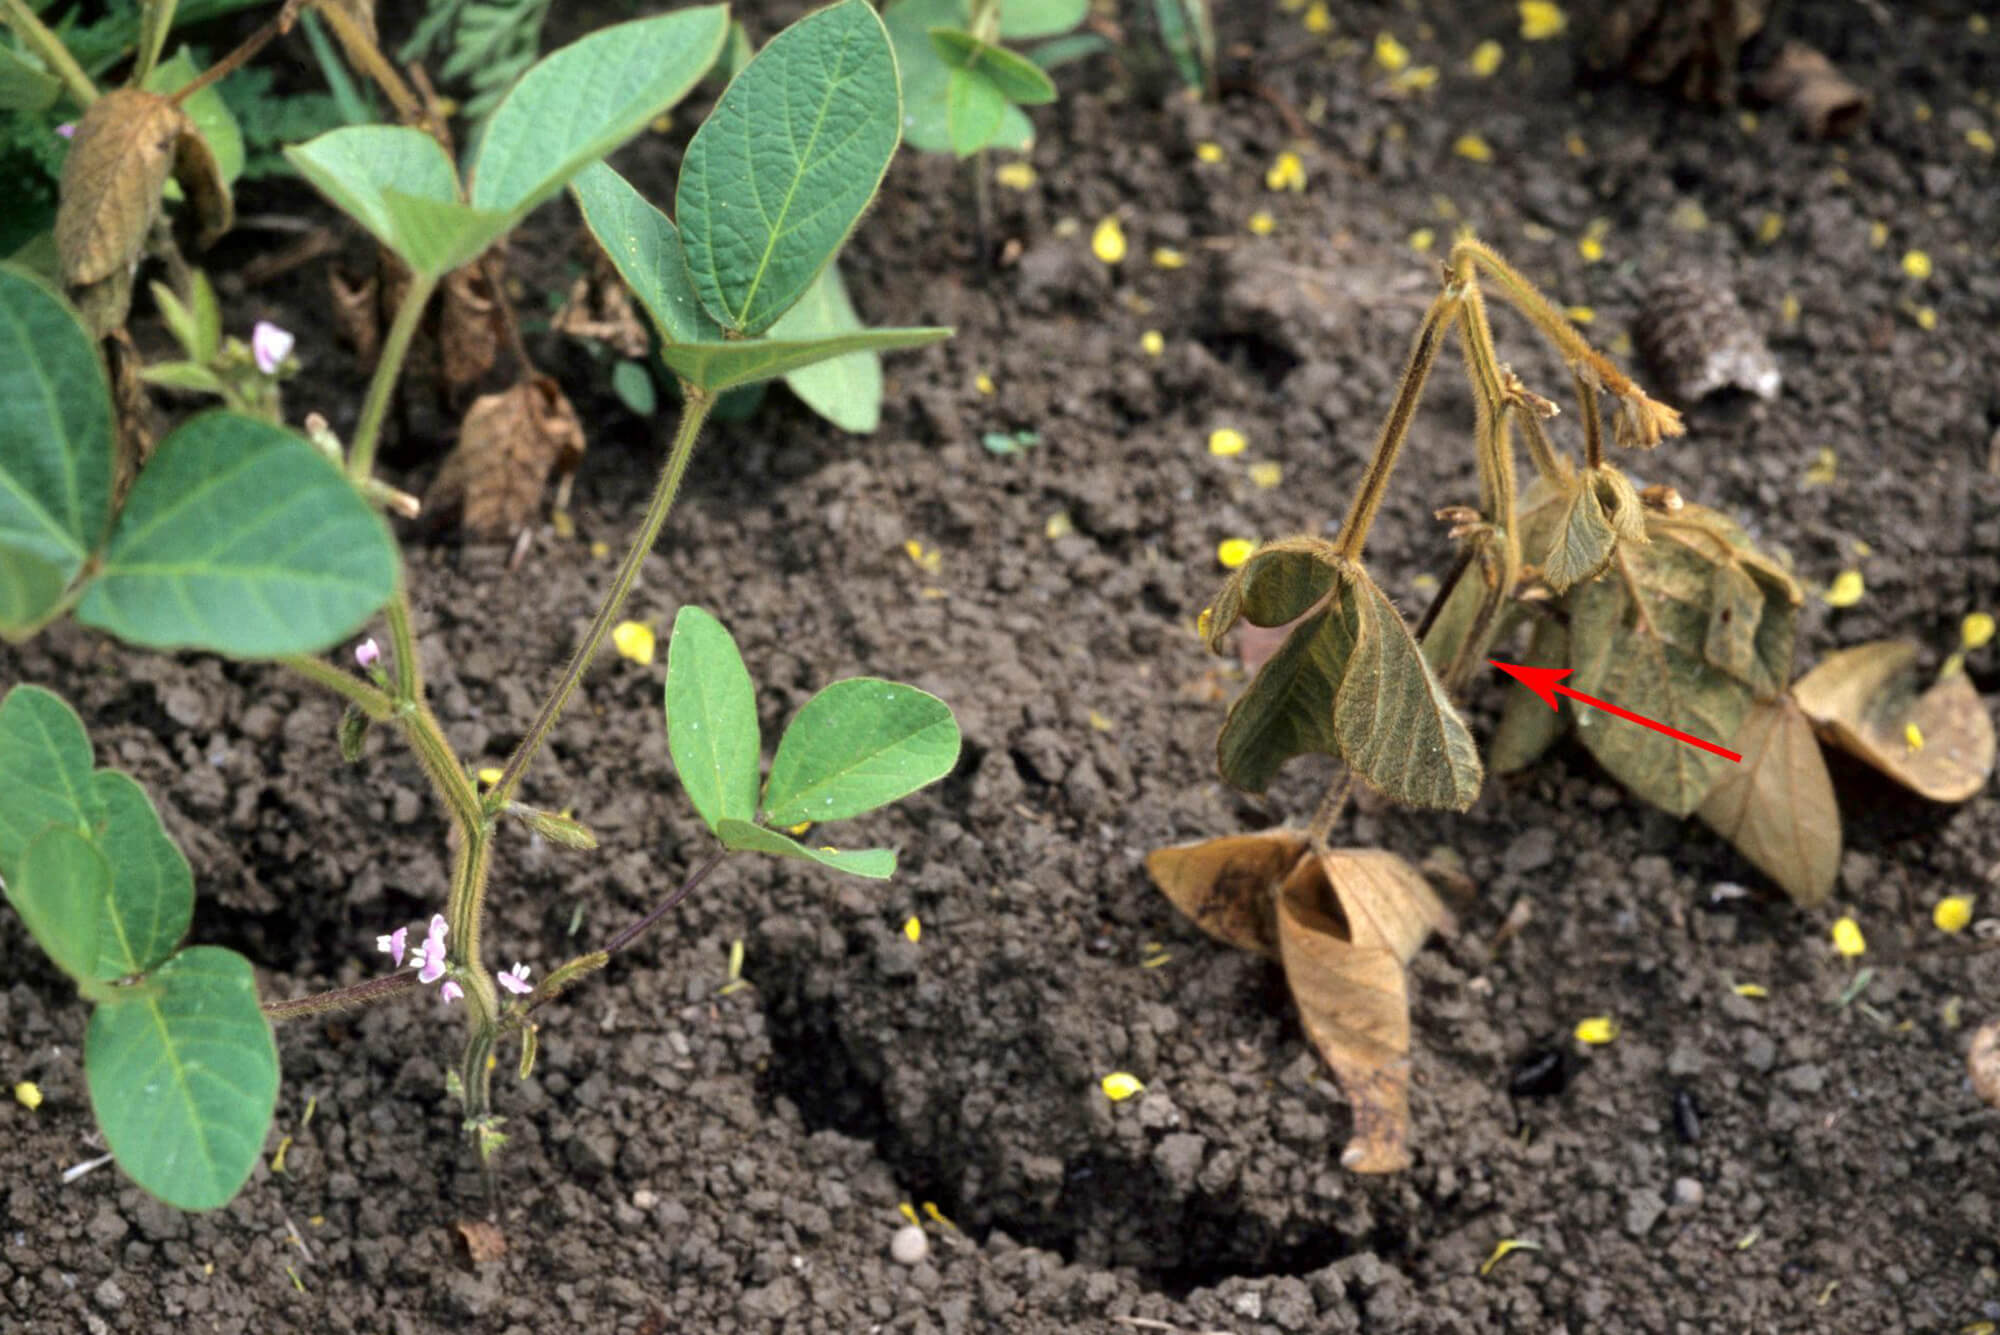 Soybean diseases and aging